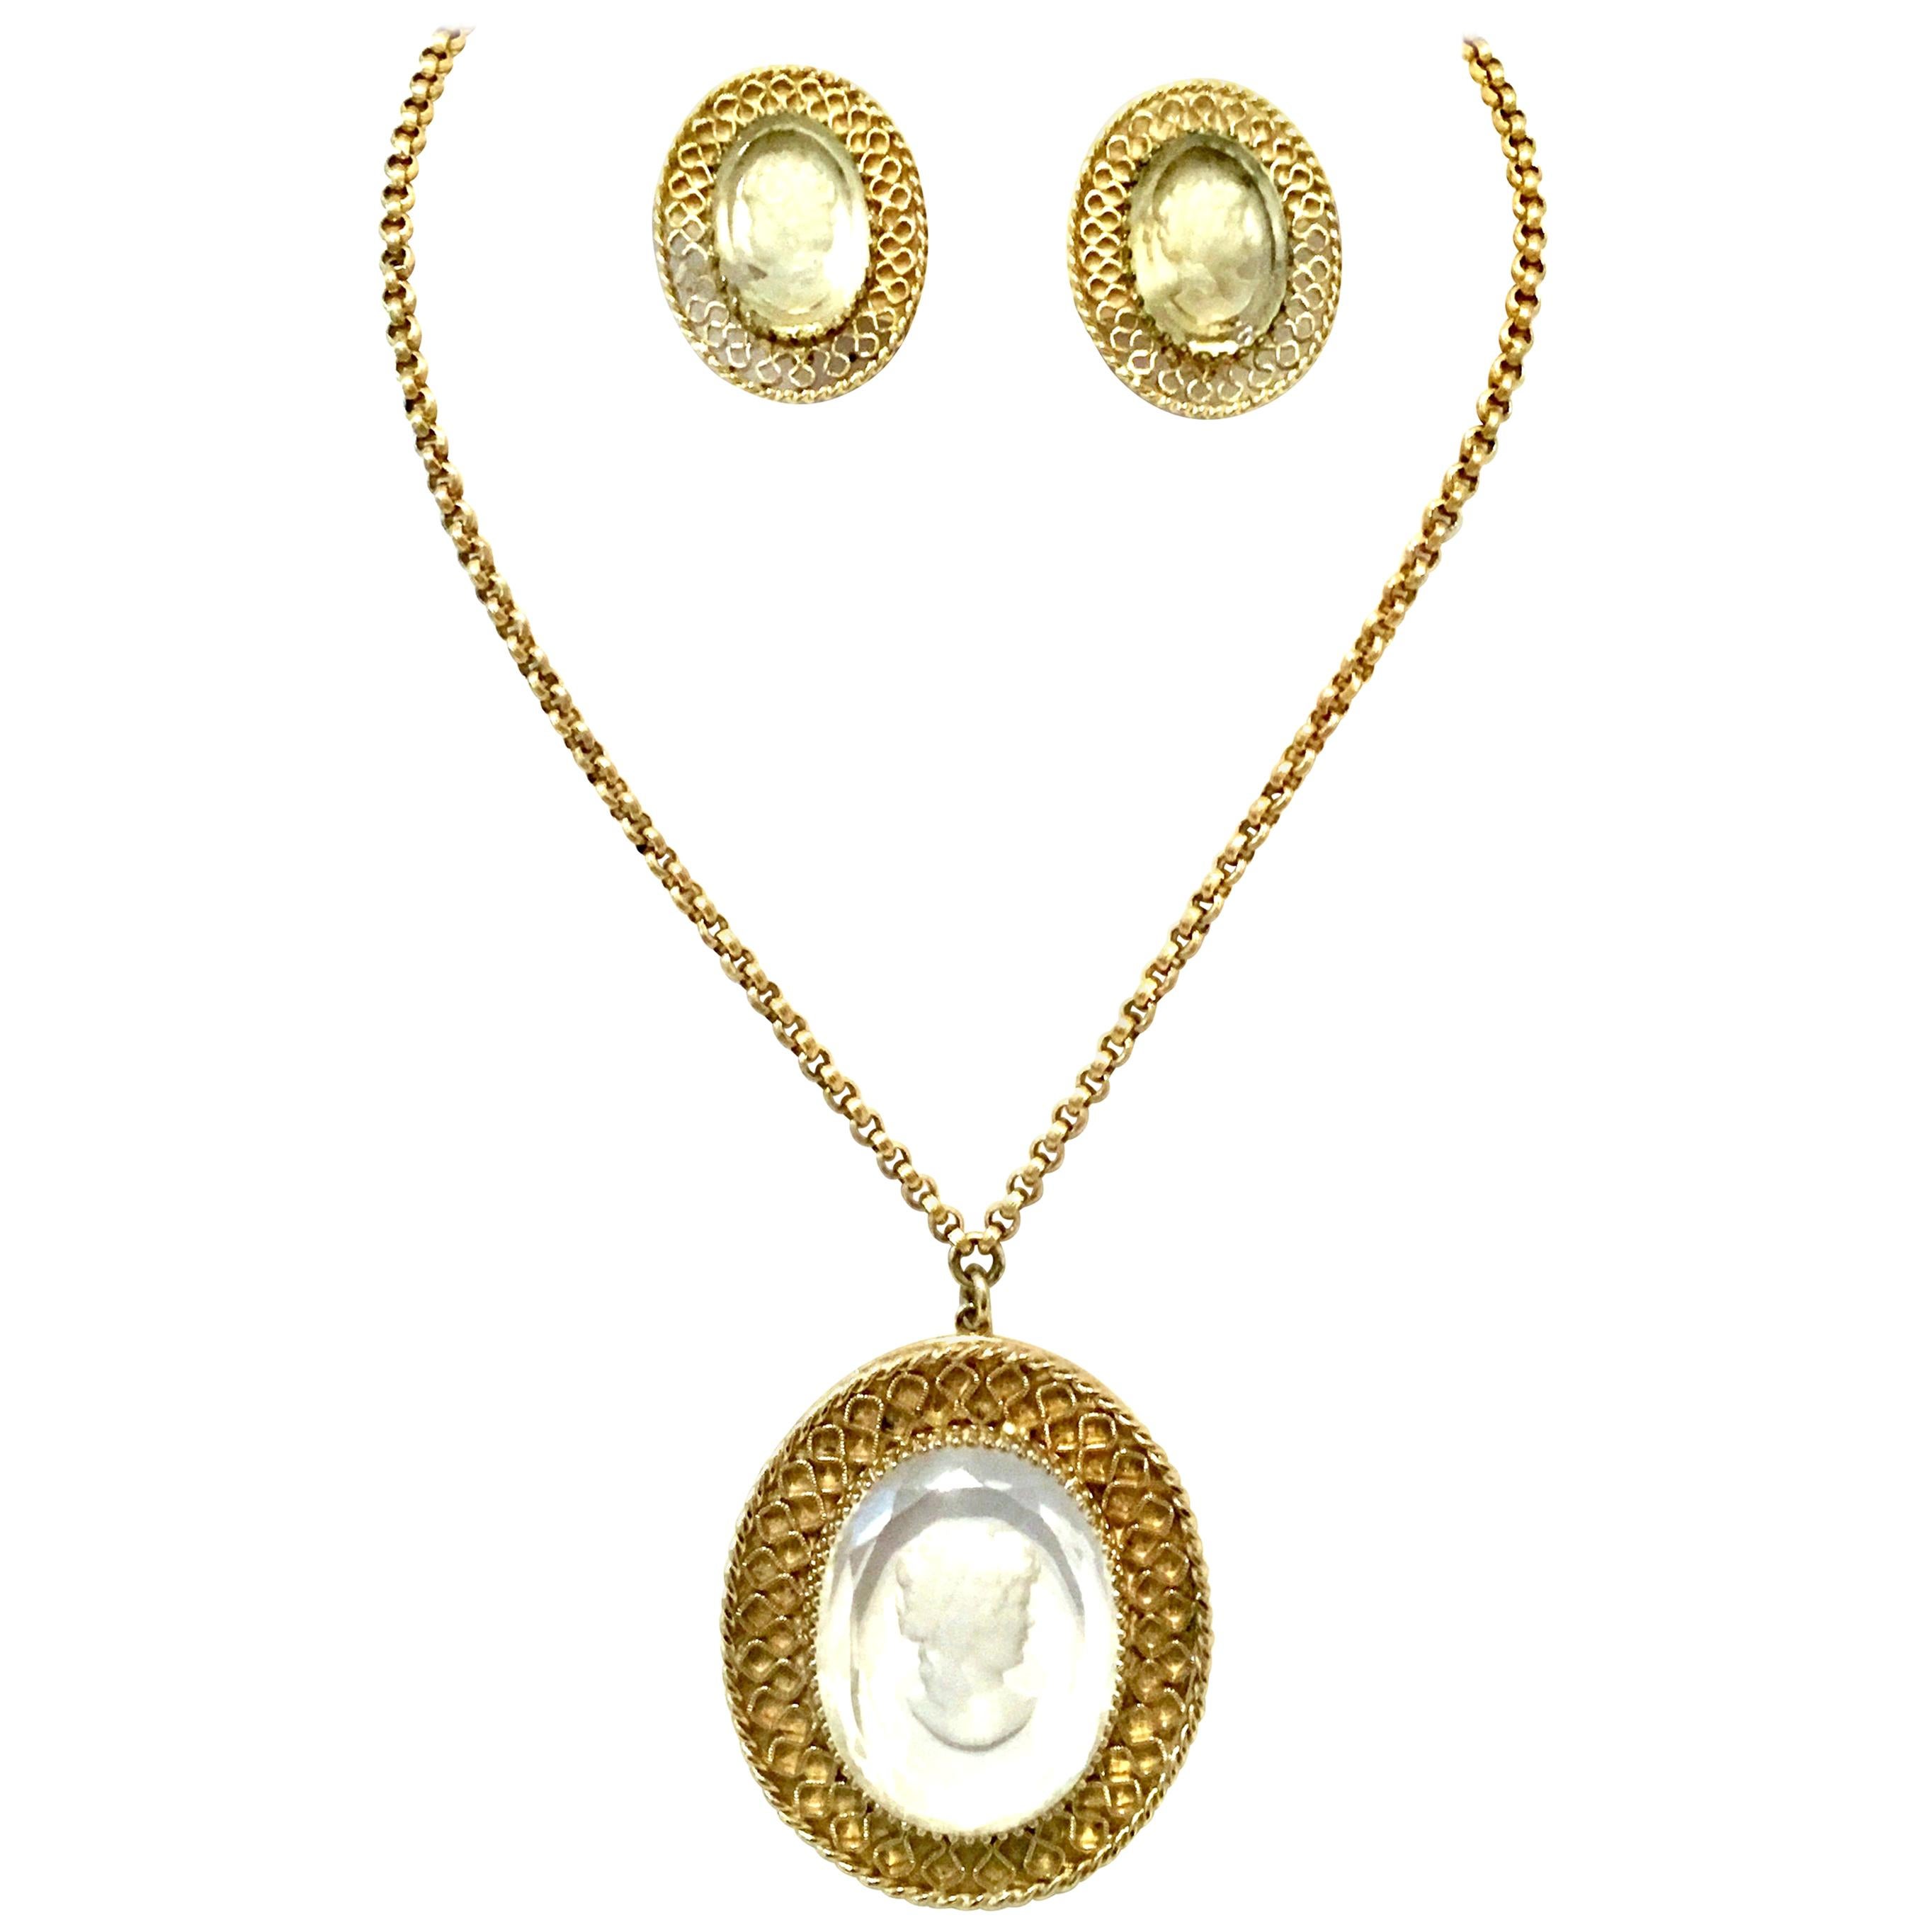 20th Century Gold And Carved Glass Necklace And Earrings By, Whiting & Davis S/3 For Sale